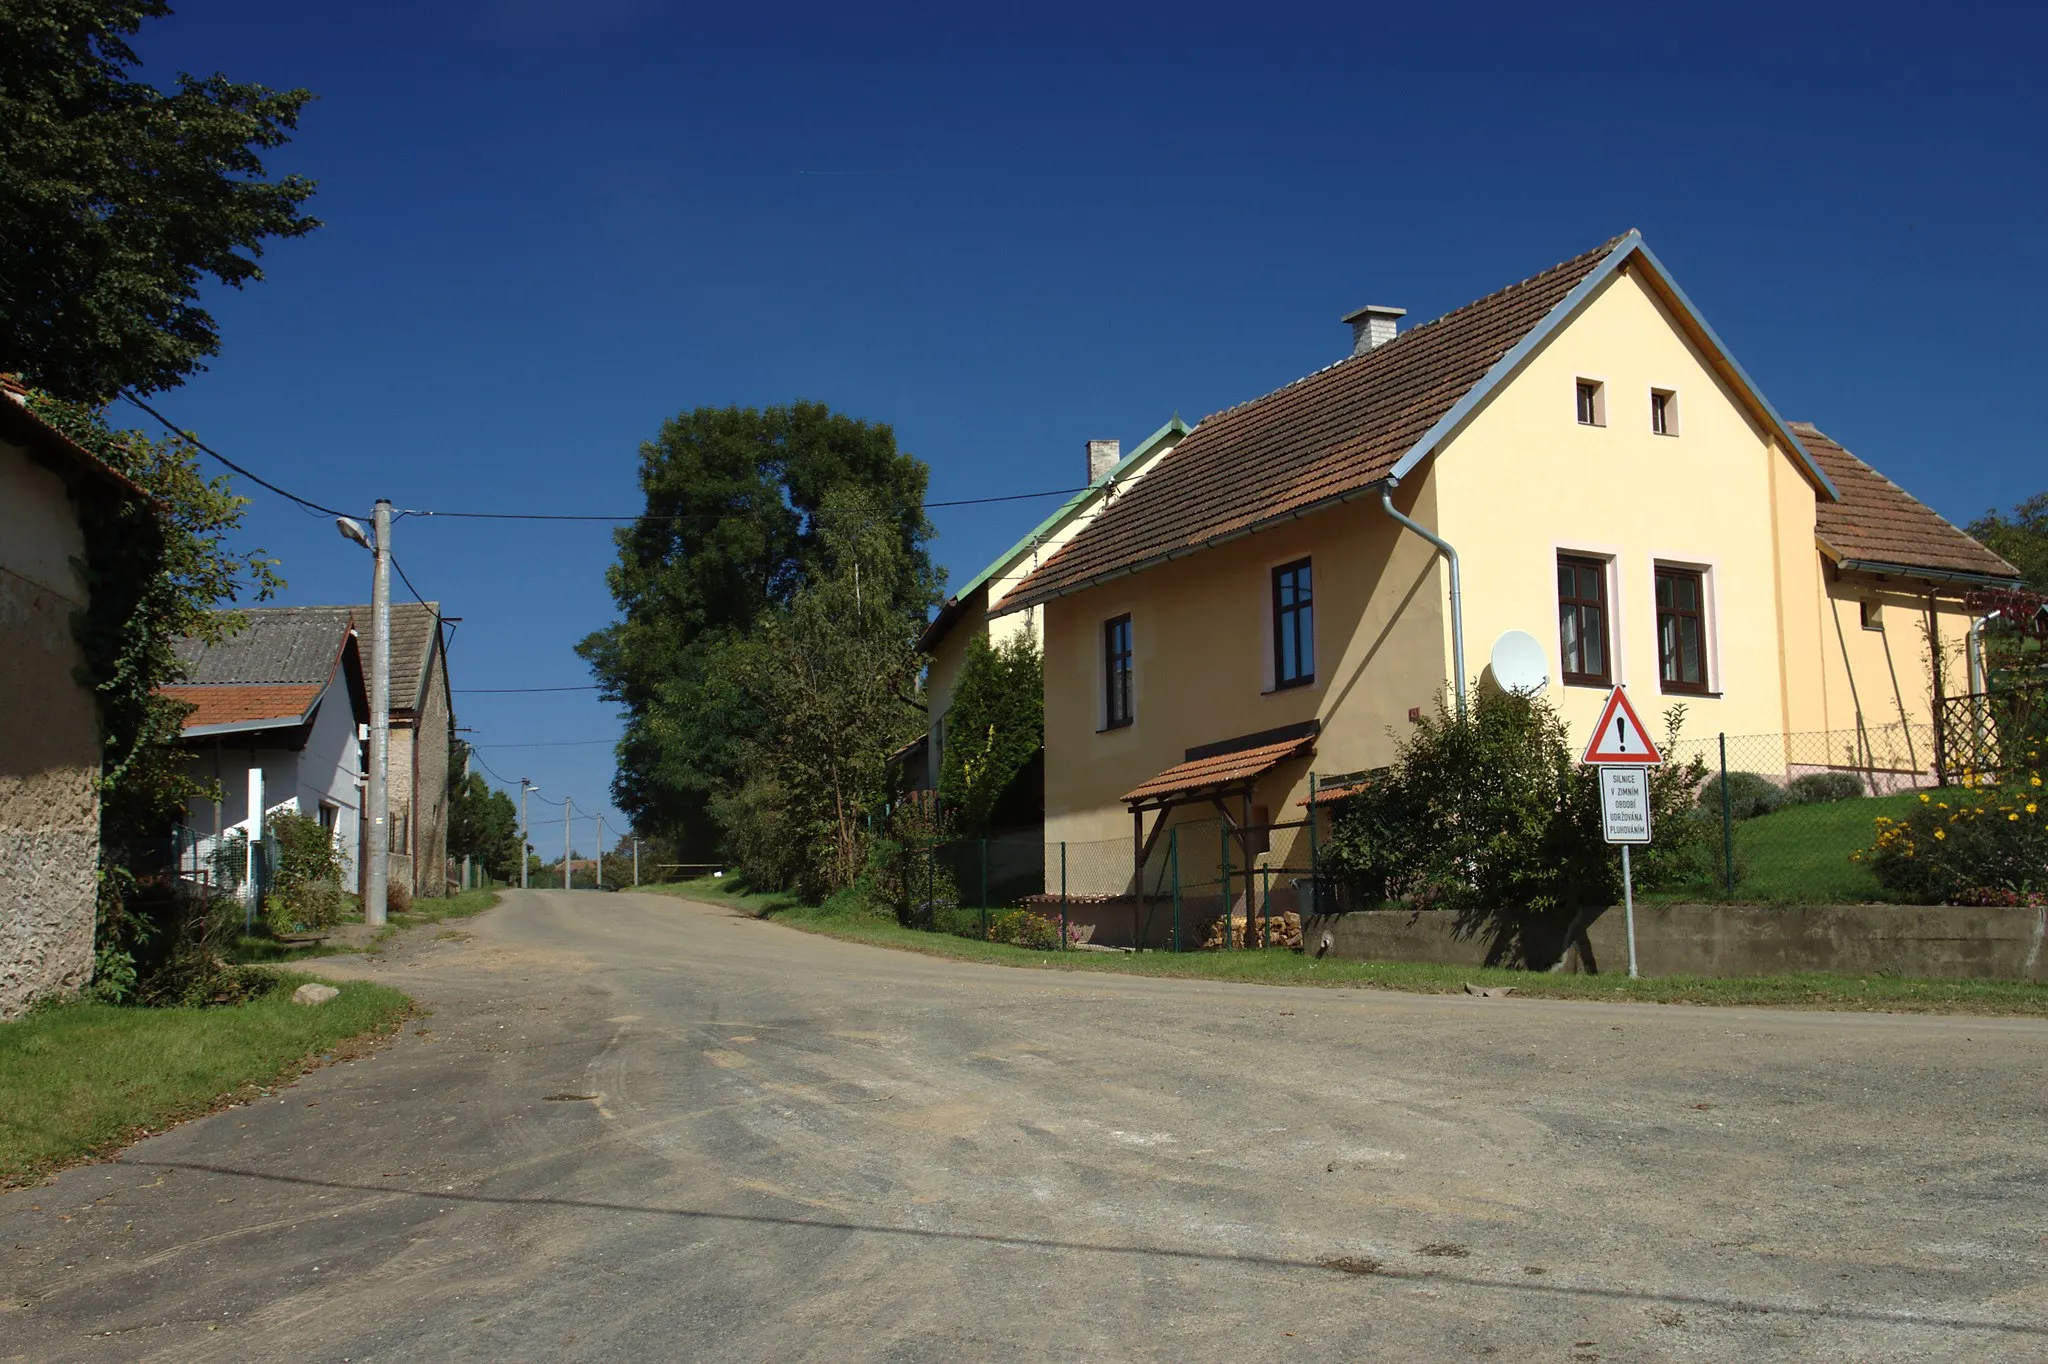 Photo showing: A crossroad near a common in Vranice (Zbizuby), Central Bohemia, CZ